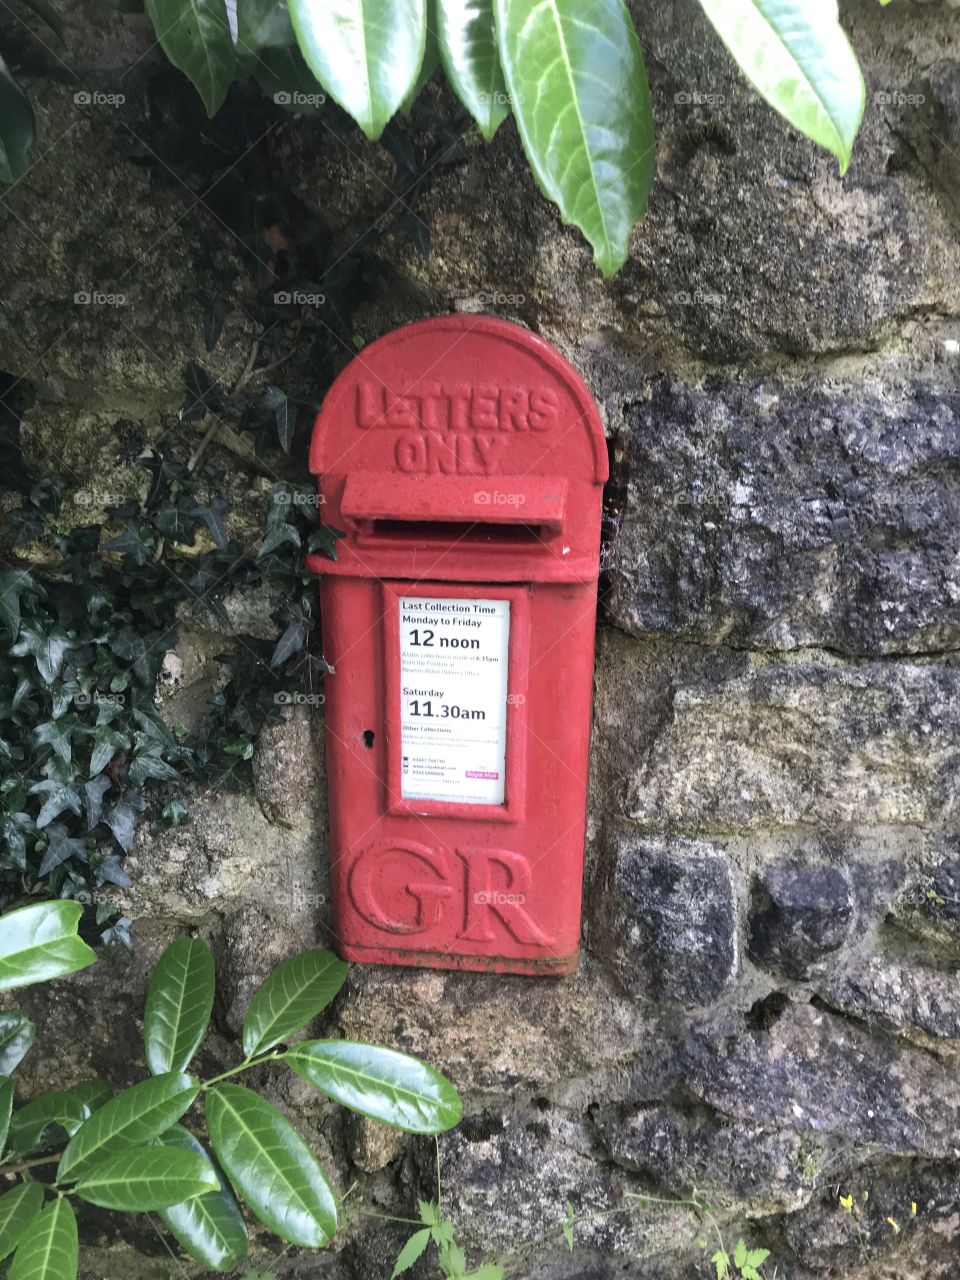 I am going to collect post boxes from now on, because one day they will be old relics and therefore they need to be reserved for historical purposes 